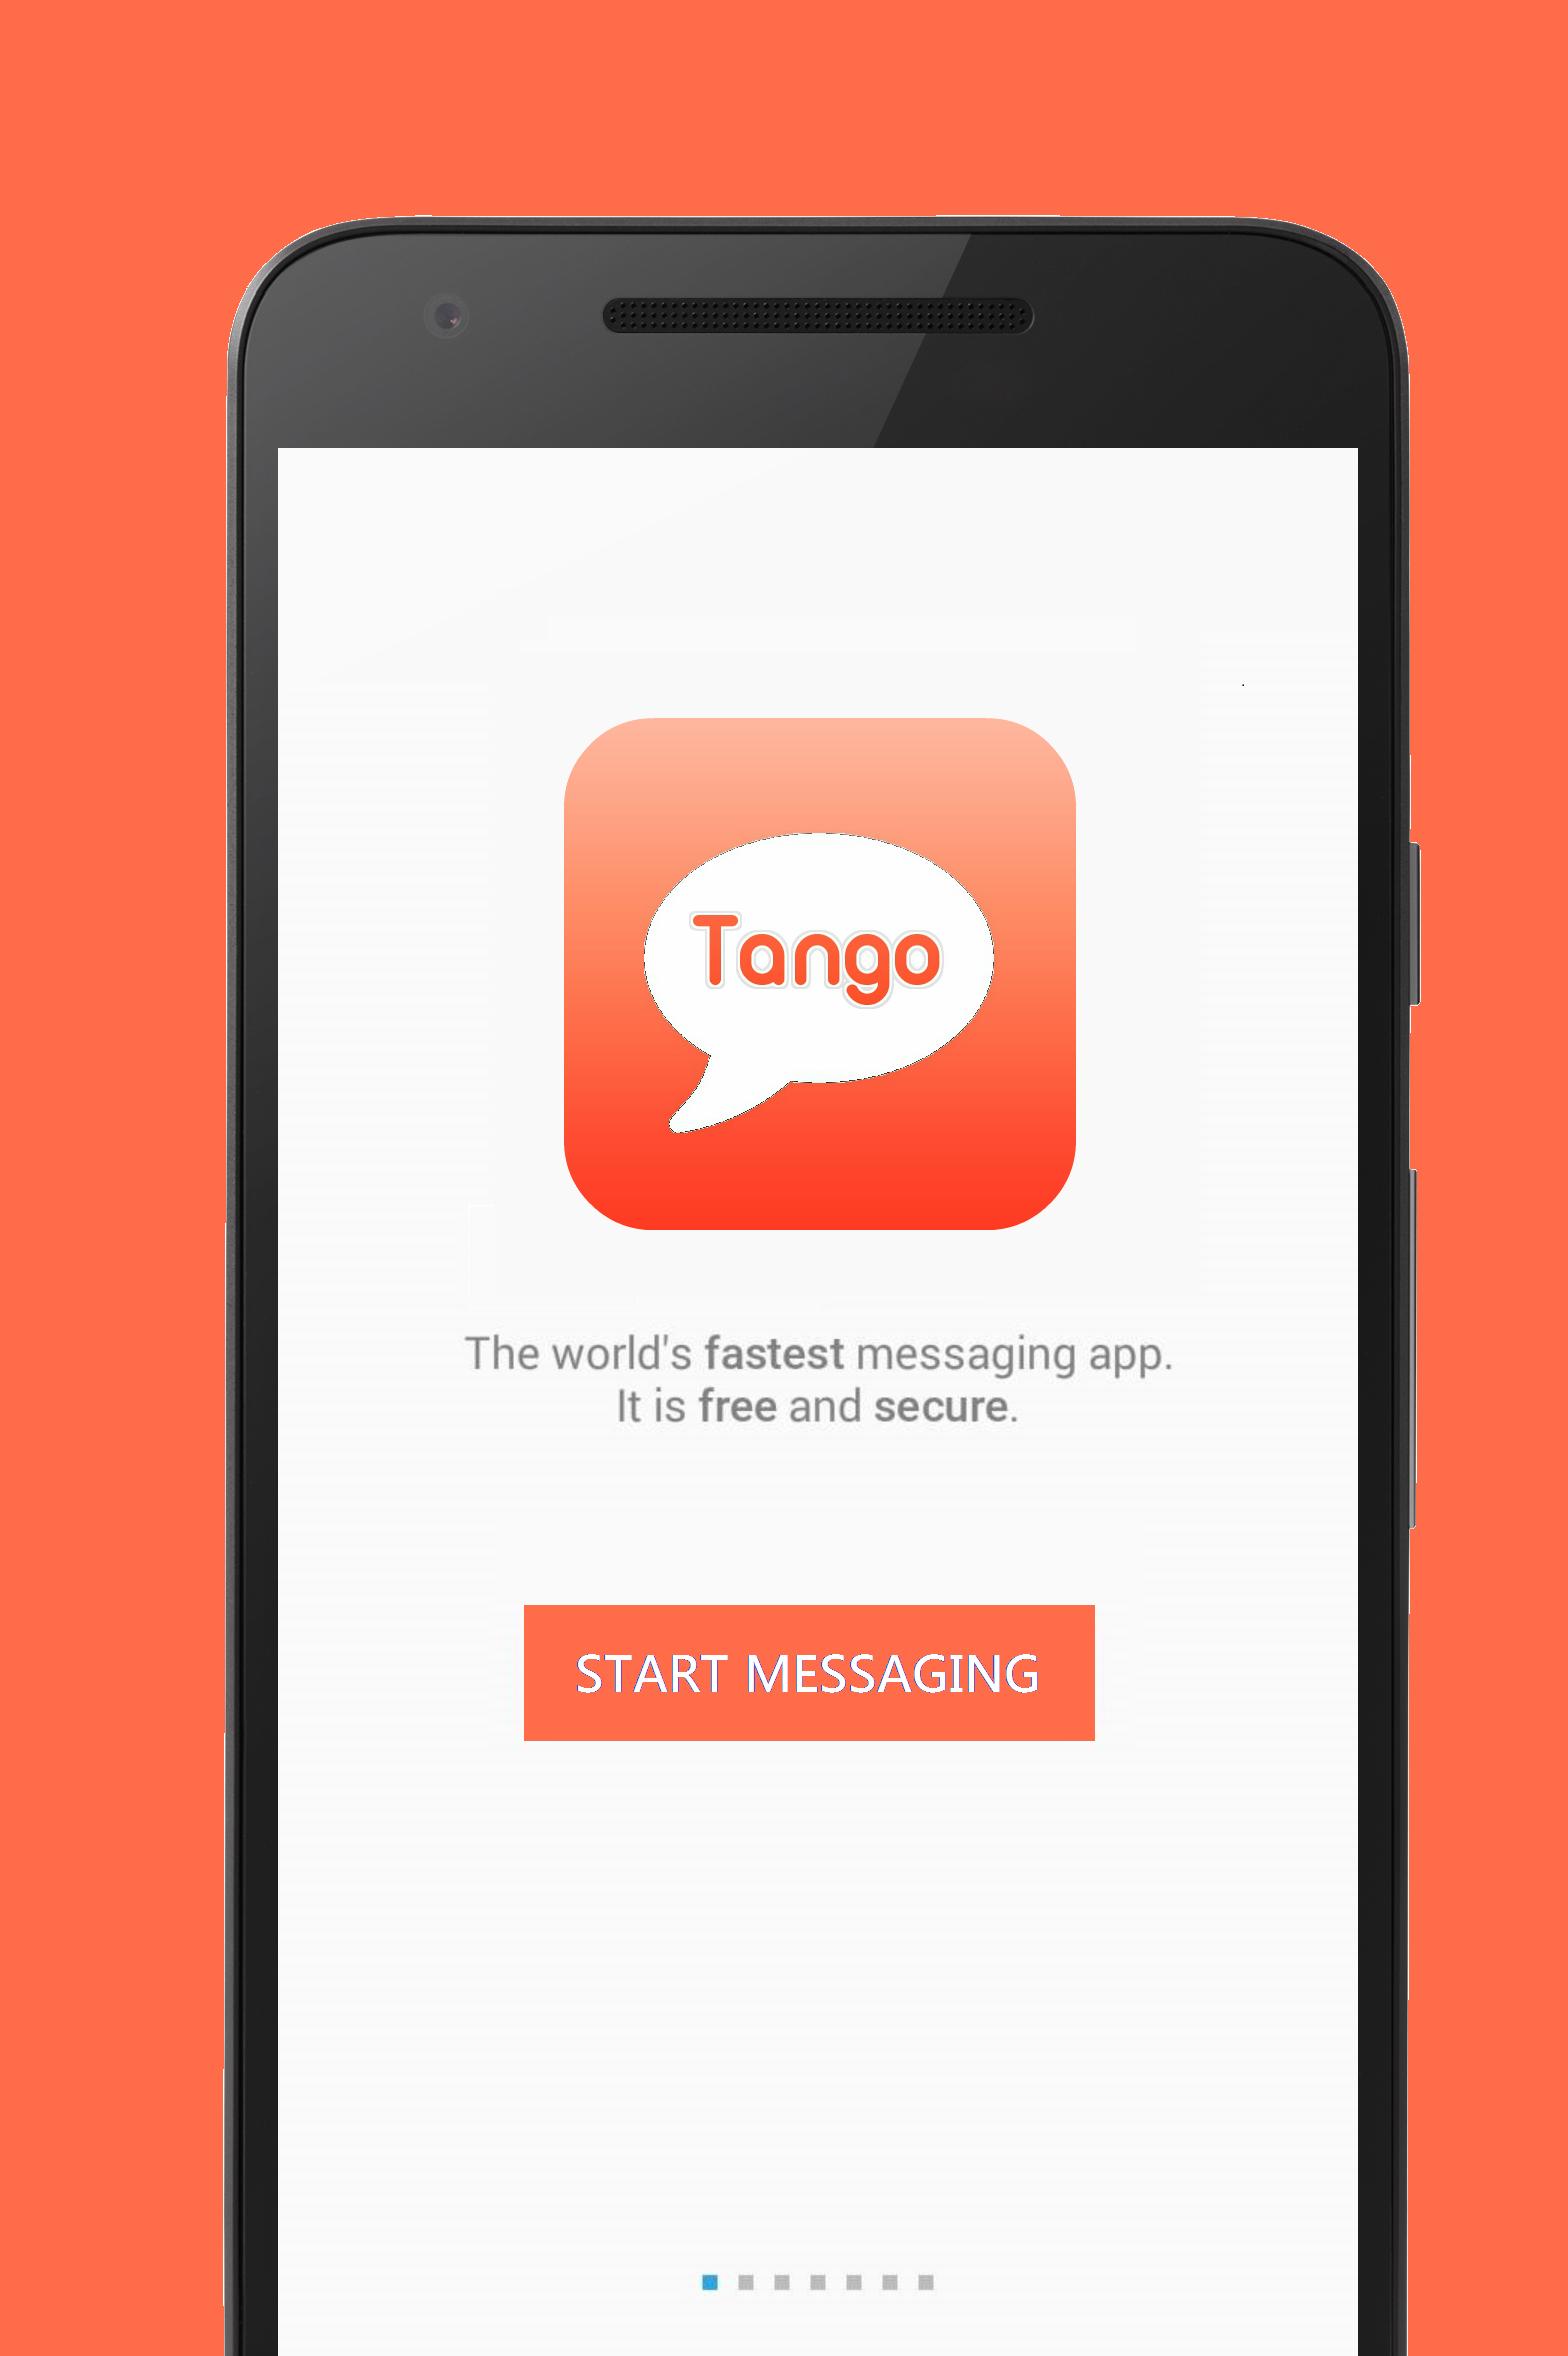 The description of Chat and Messenger for Tango App.